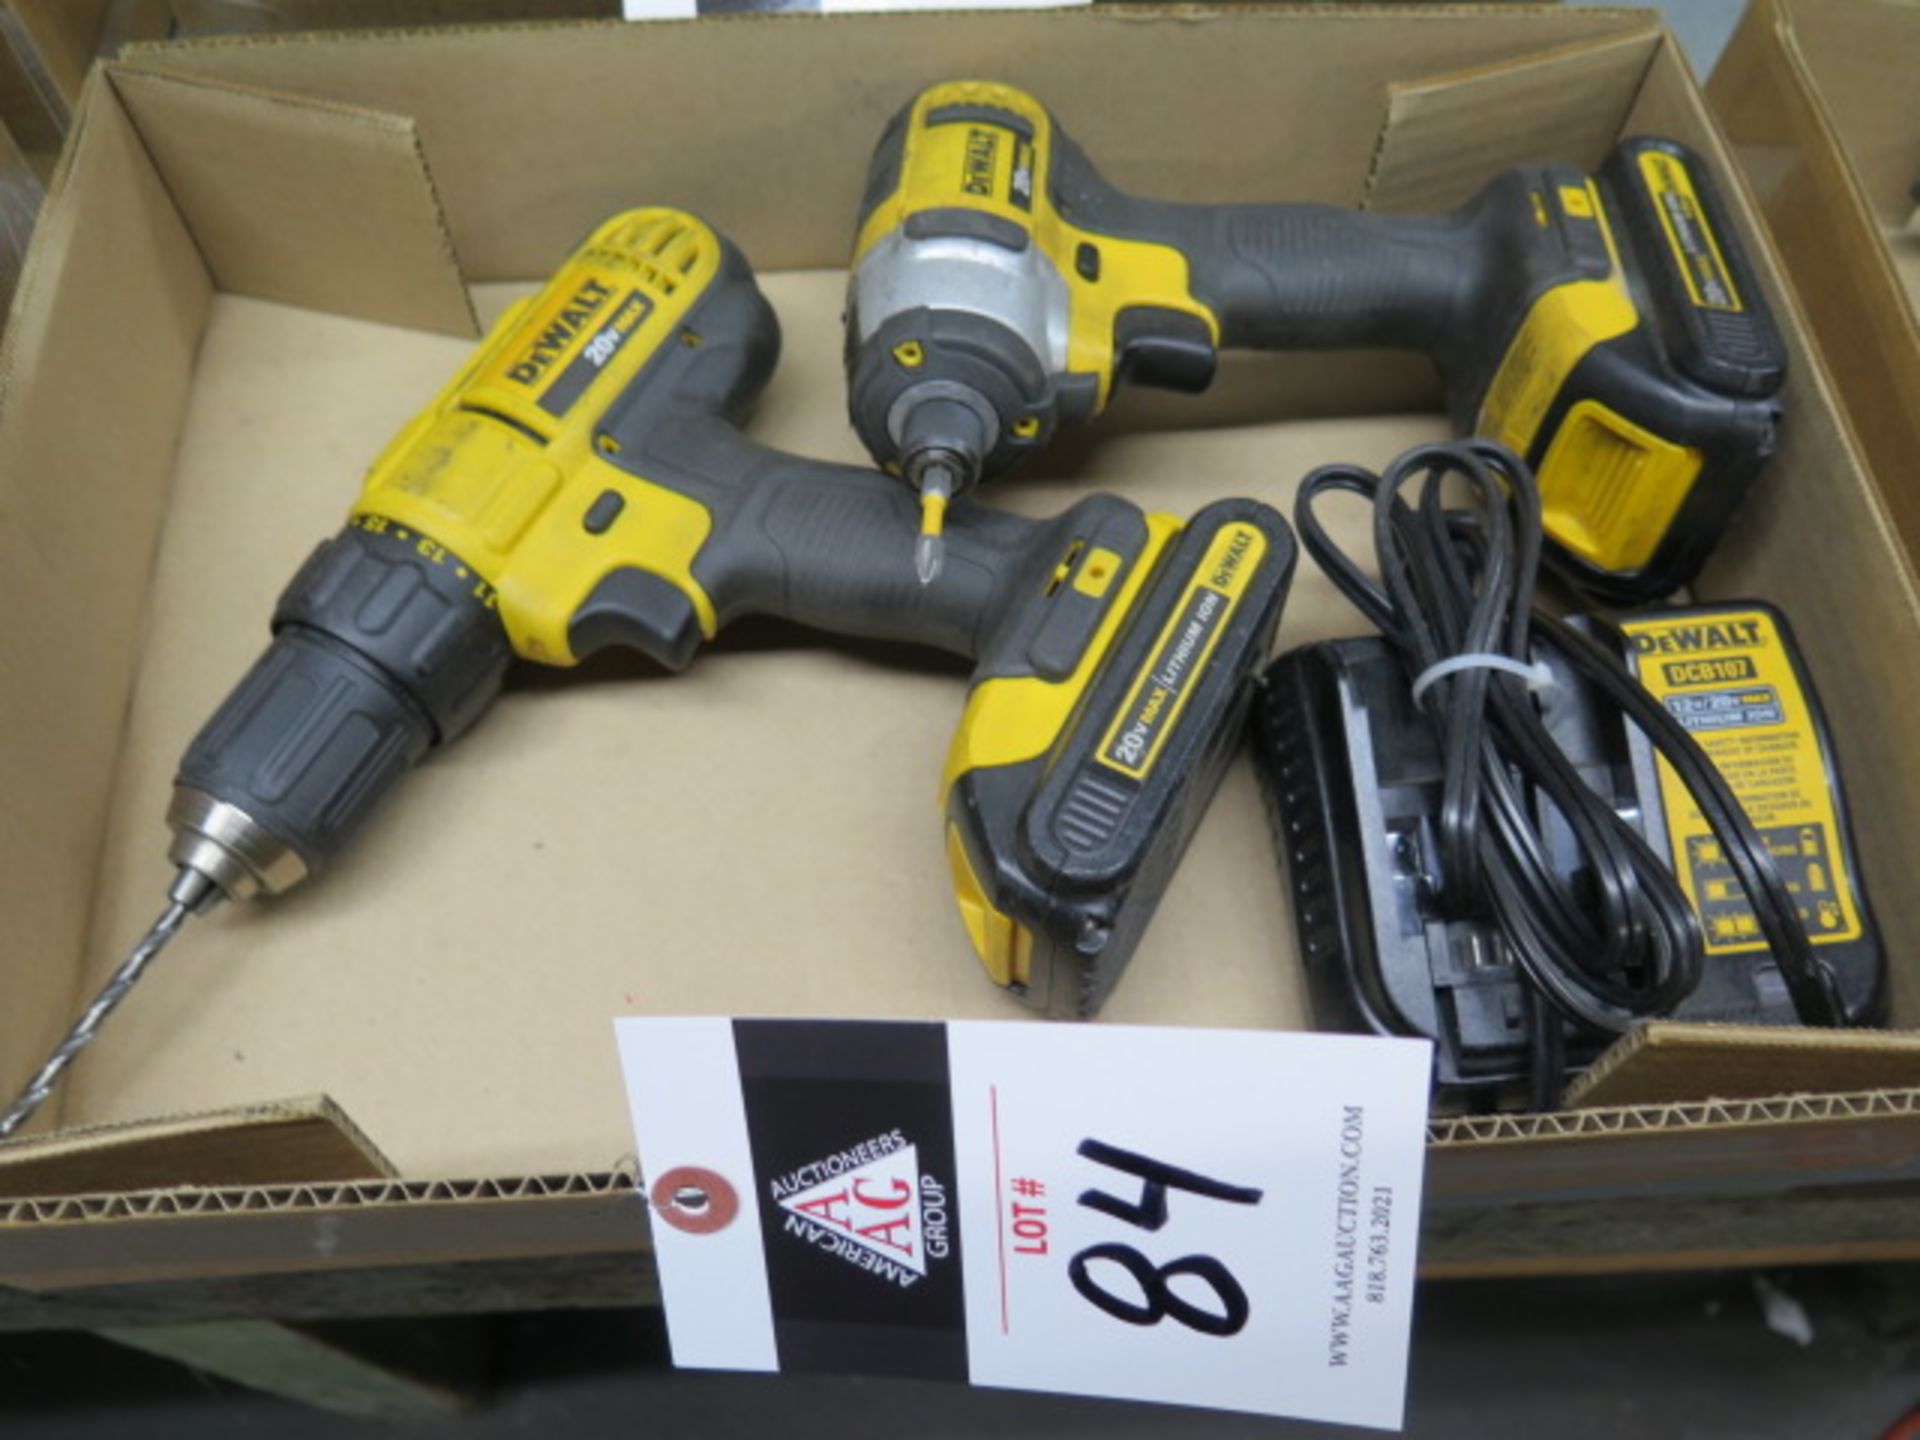 DeWalt 20 Volt Cardless Drill and Nut Driver w/ Charger (SOLD AS-IS - NO WARRANTY)